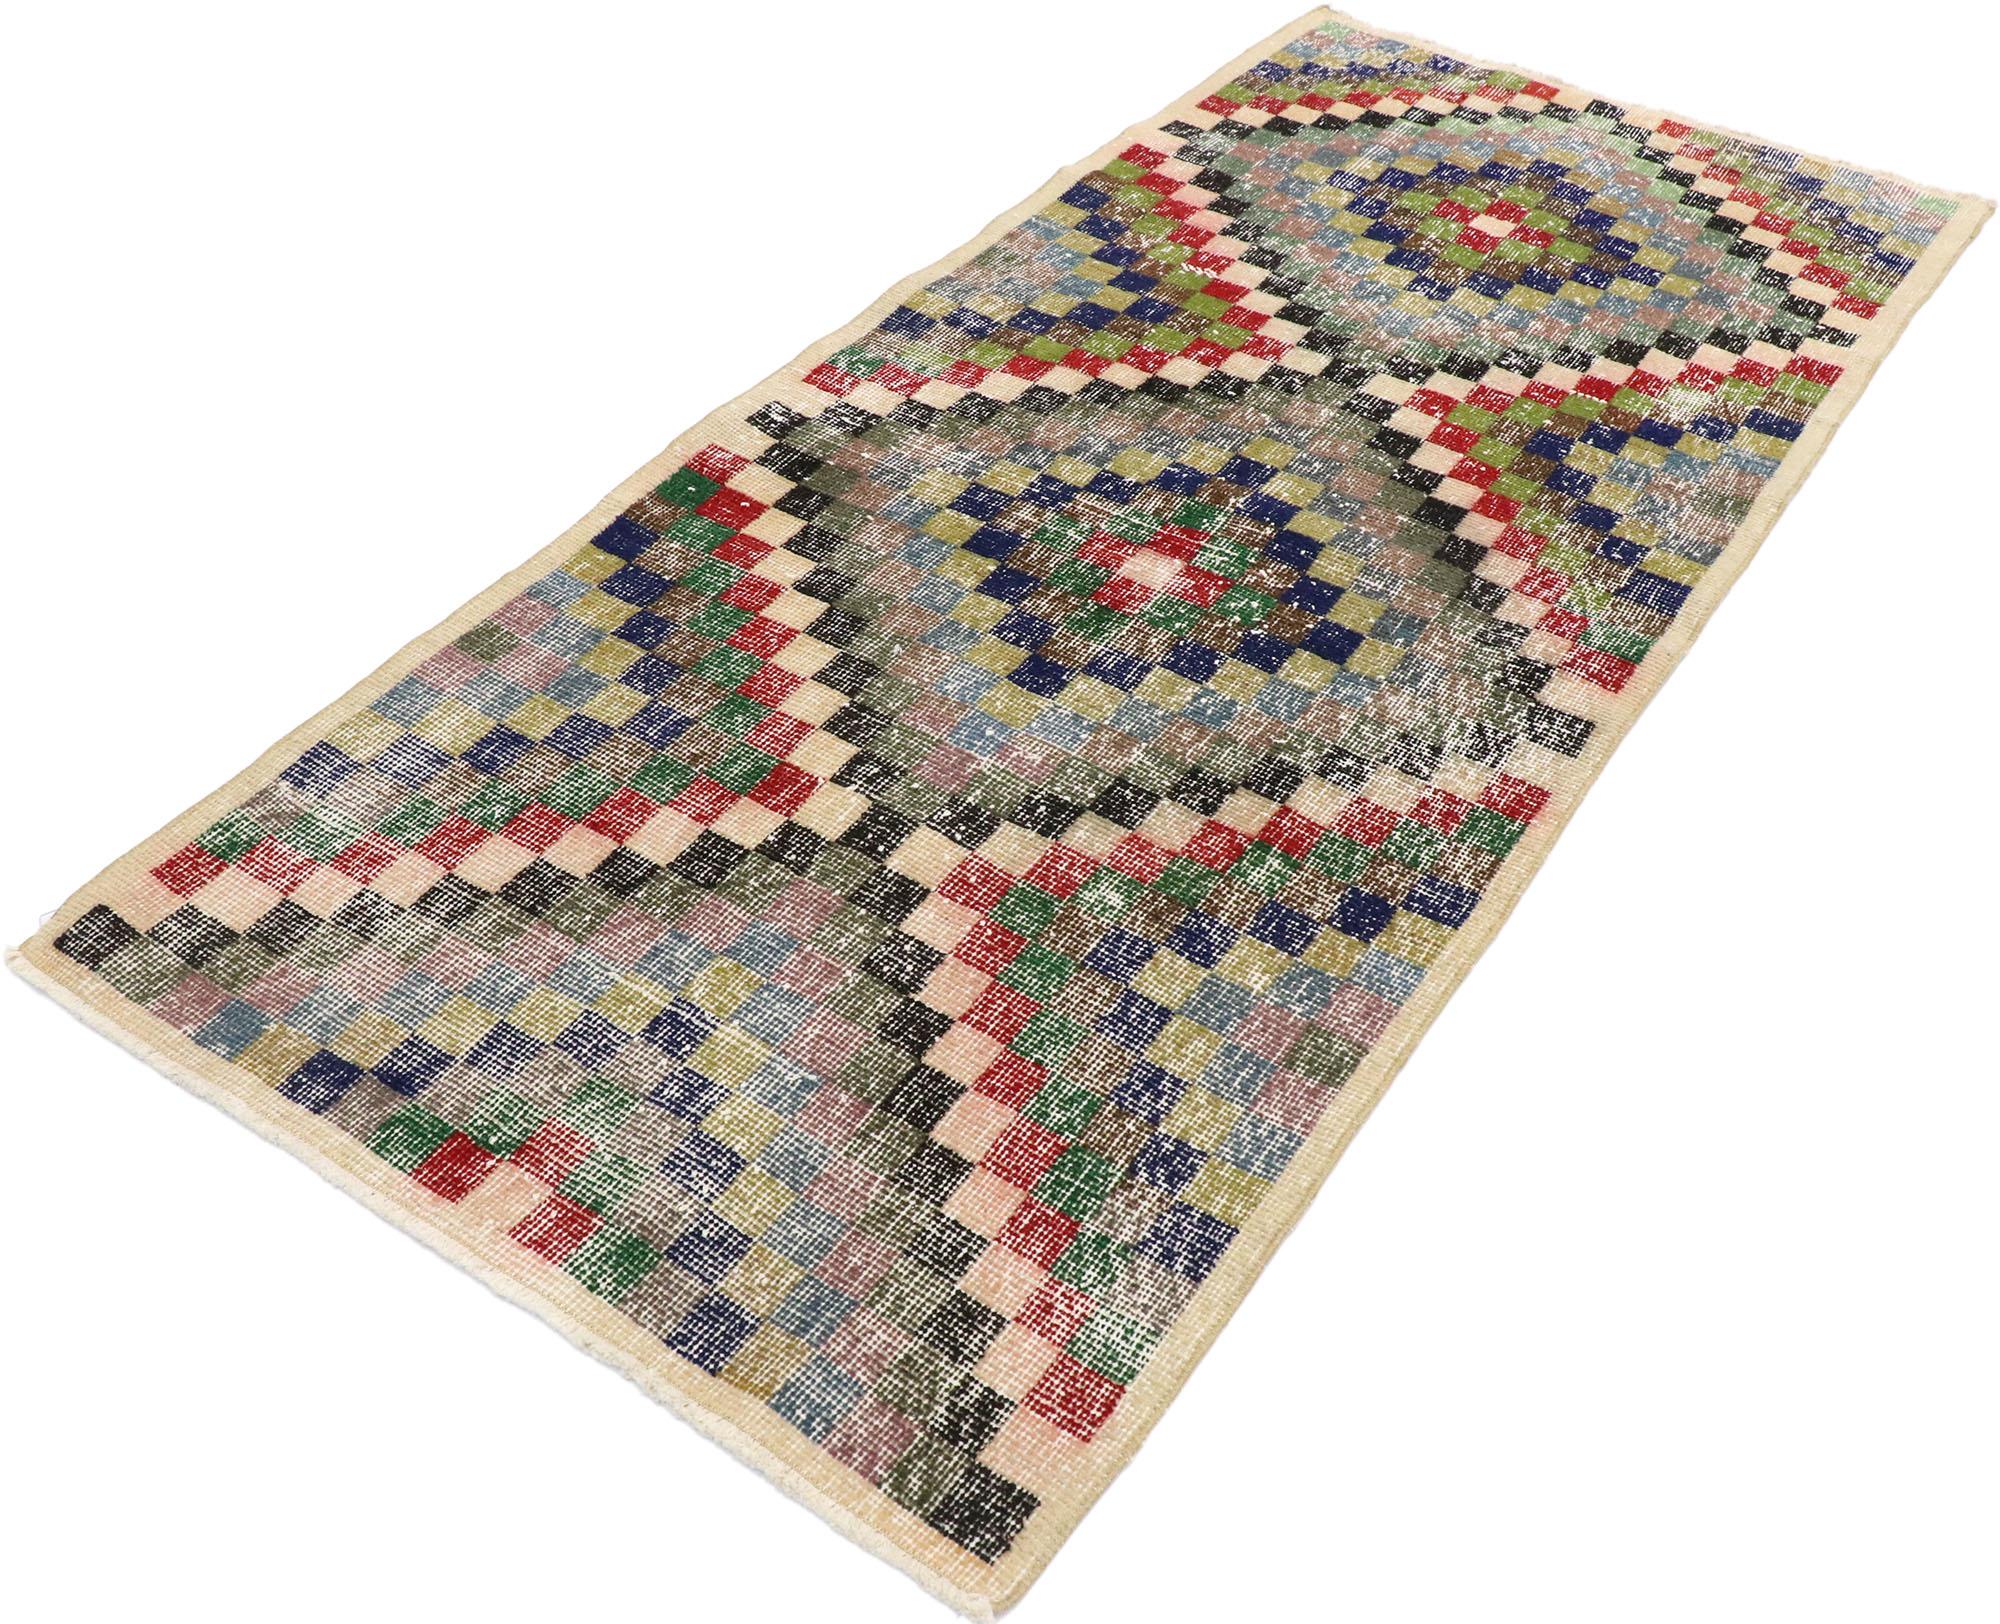 53339, distressed vintage Turkish Sivas rug with rustic Mid-Century Modern Cubist style. This hand knotted wool distressed vintage Turkish Sivas rug features an all-over checkered diamond pattern comprised of rows of multi-colored cubes. Each row of